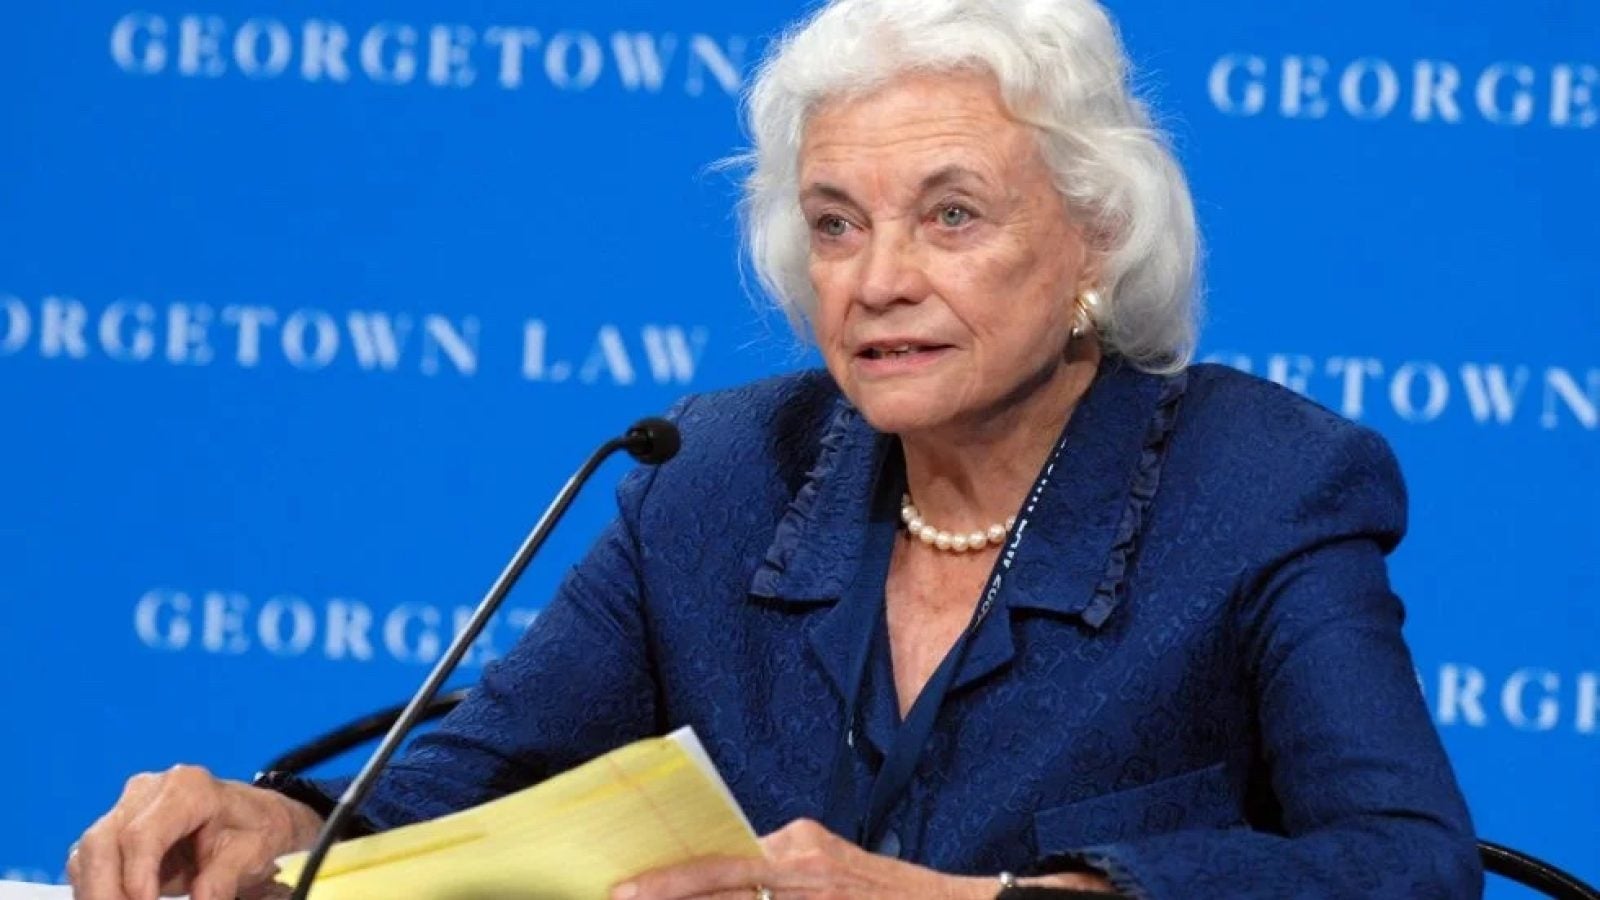 The late Supreme Court Justice Sandra Day O&#039;Connor sits in front of a blue background that says &quot;Georgetown Law&quot;